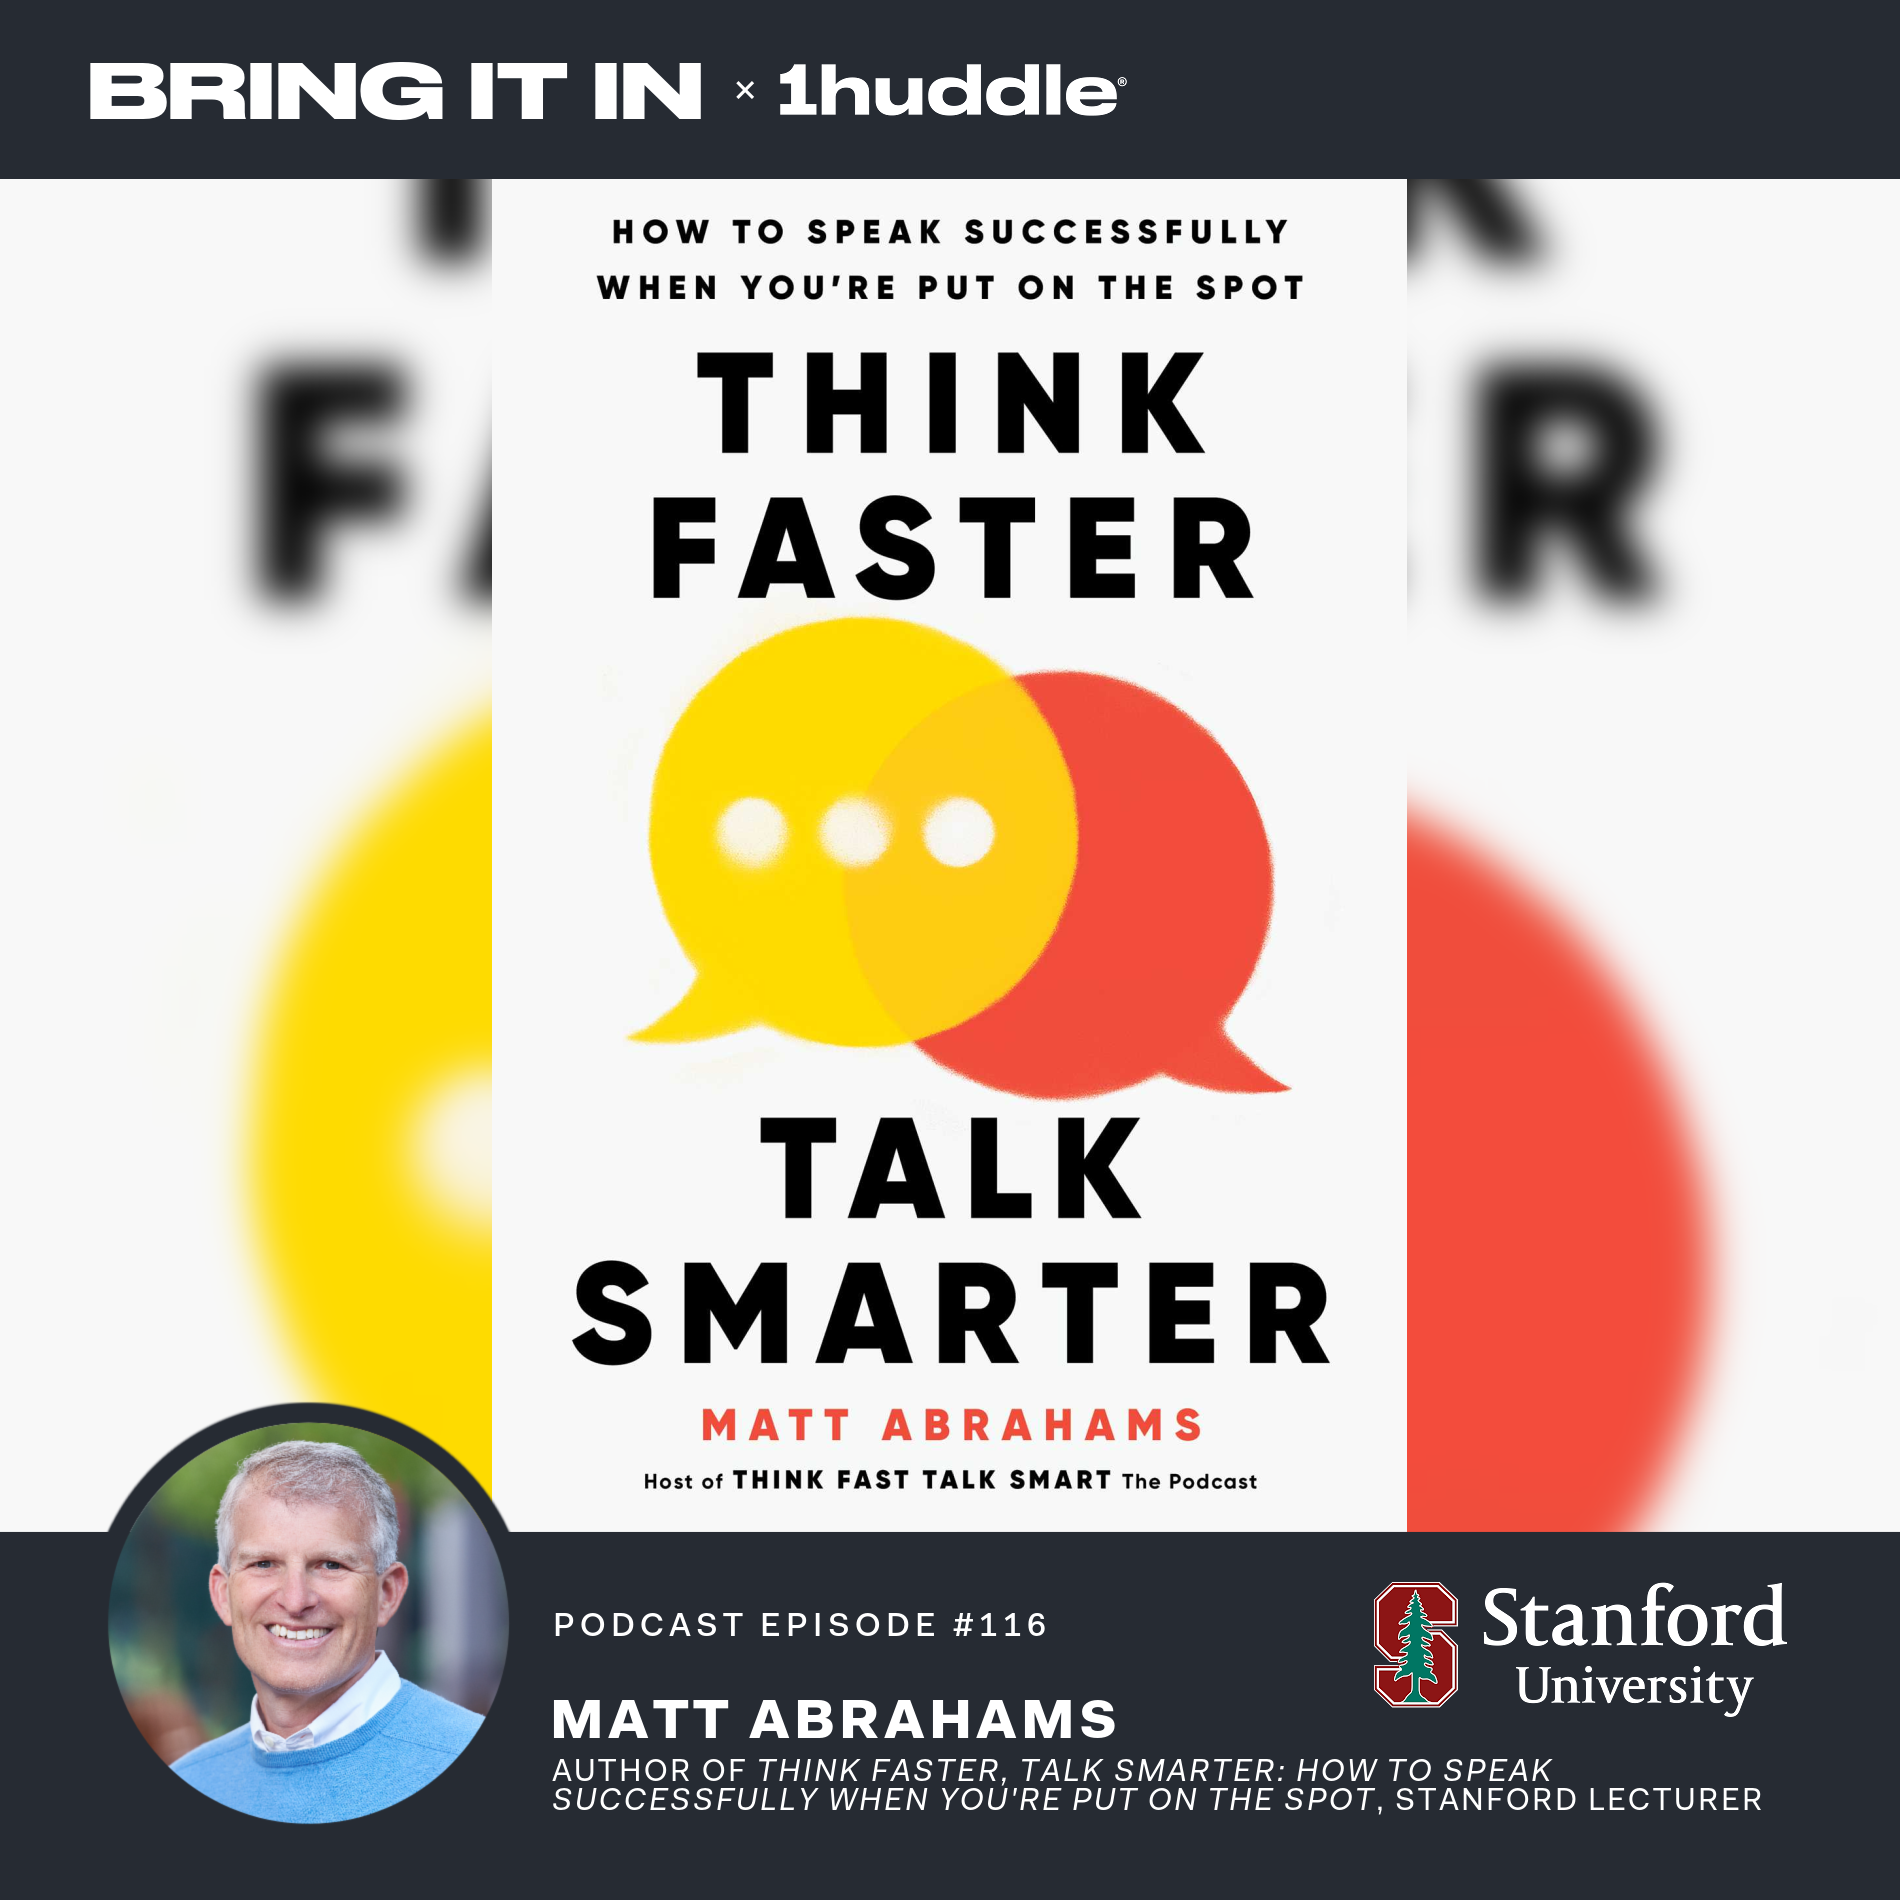 Author of “Think Faster, Talk Smarter: How to Speak Successfully When You’re Put on the Spot”